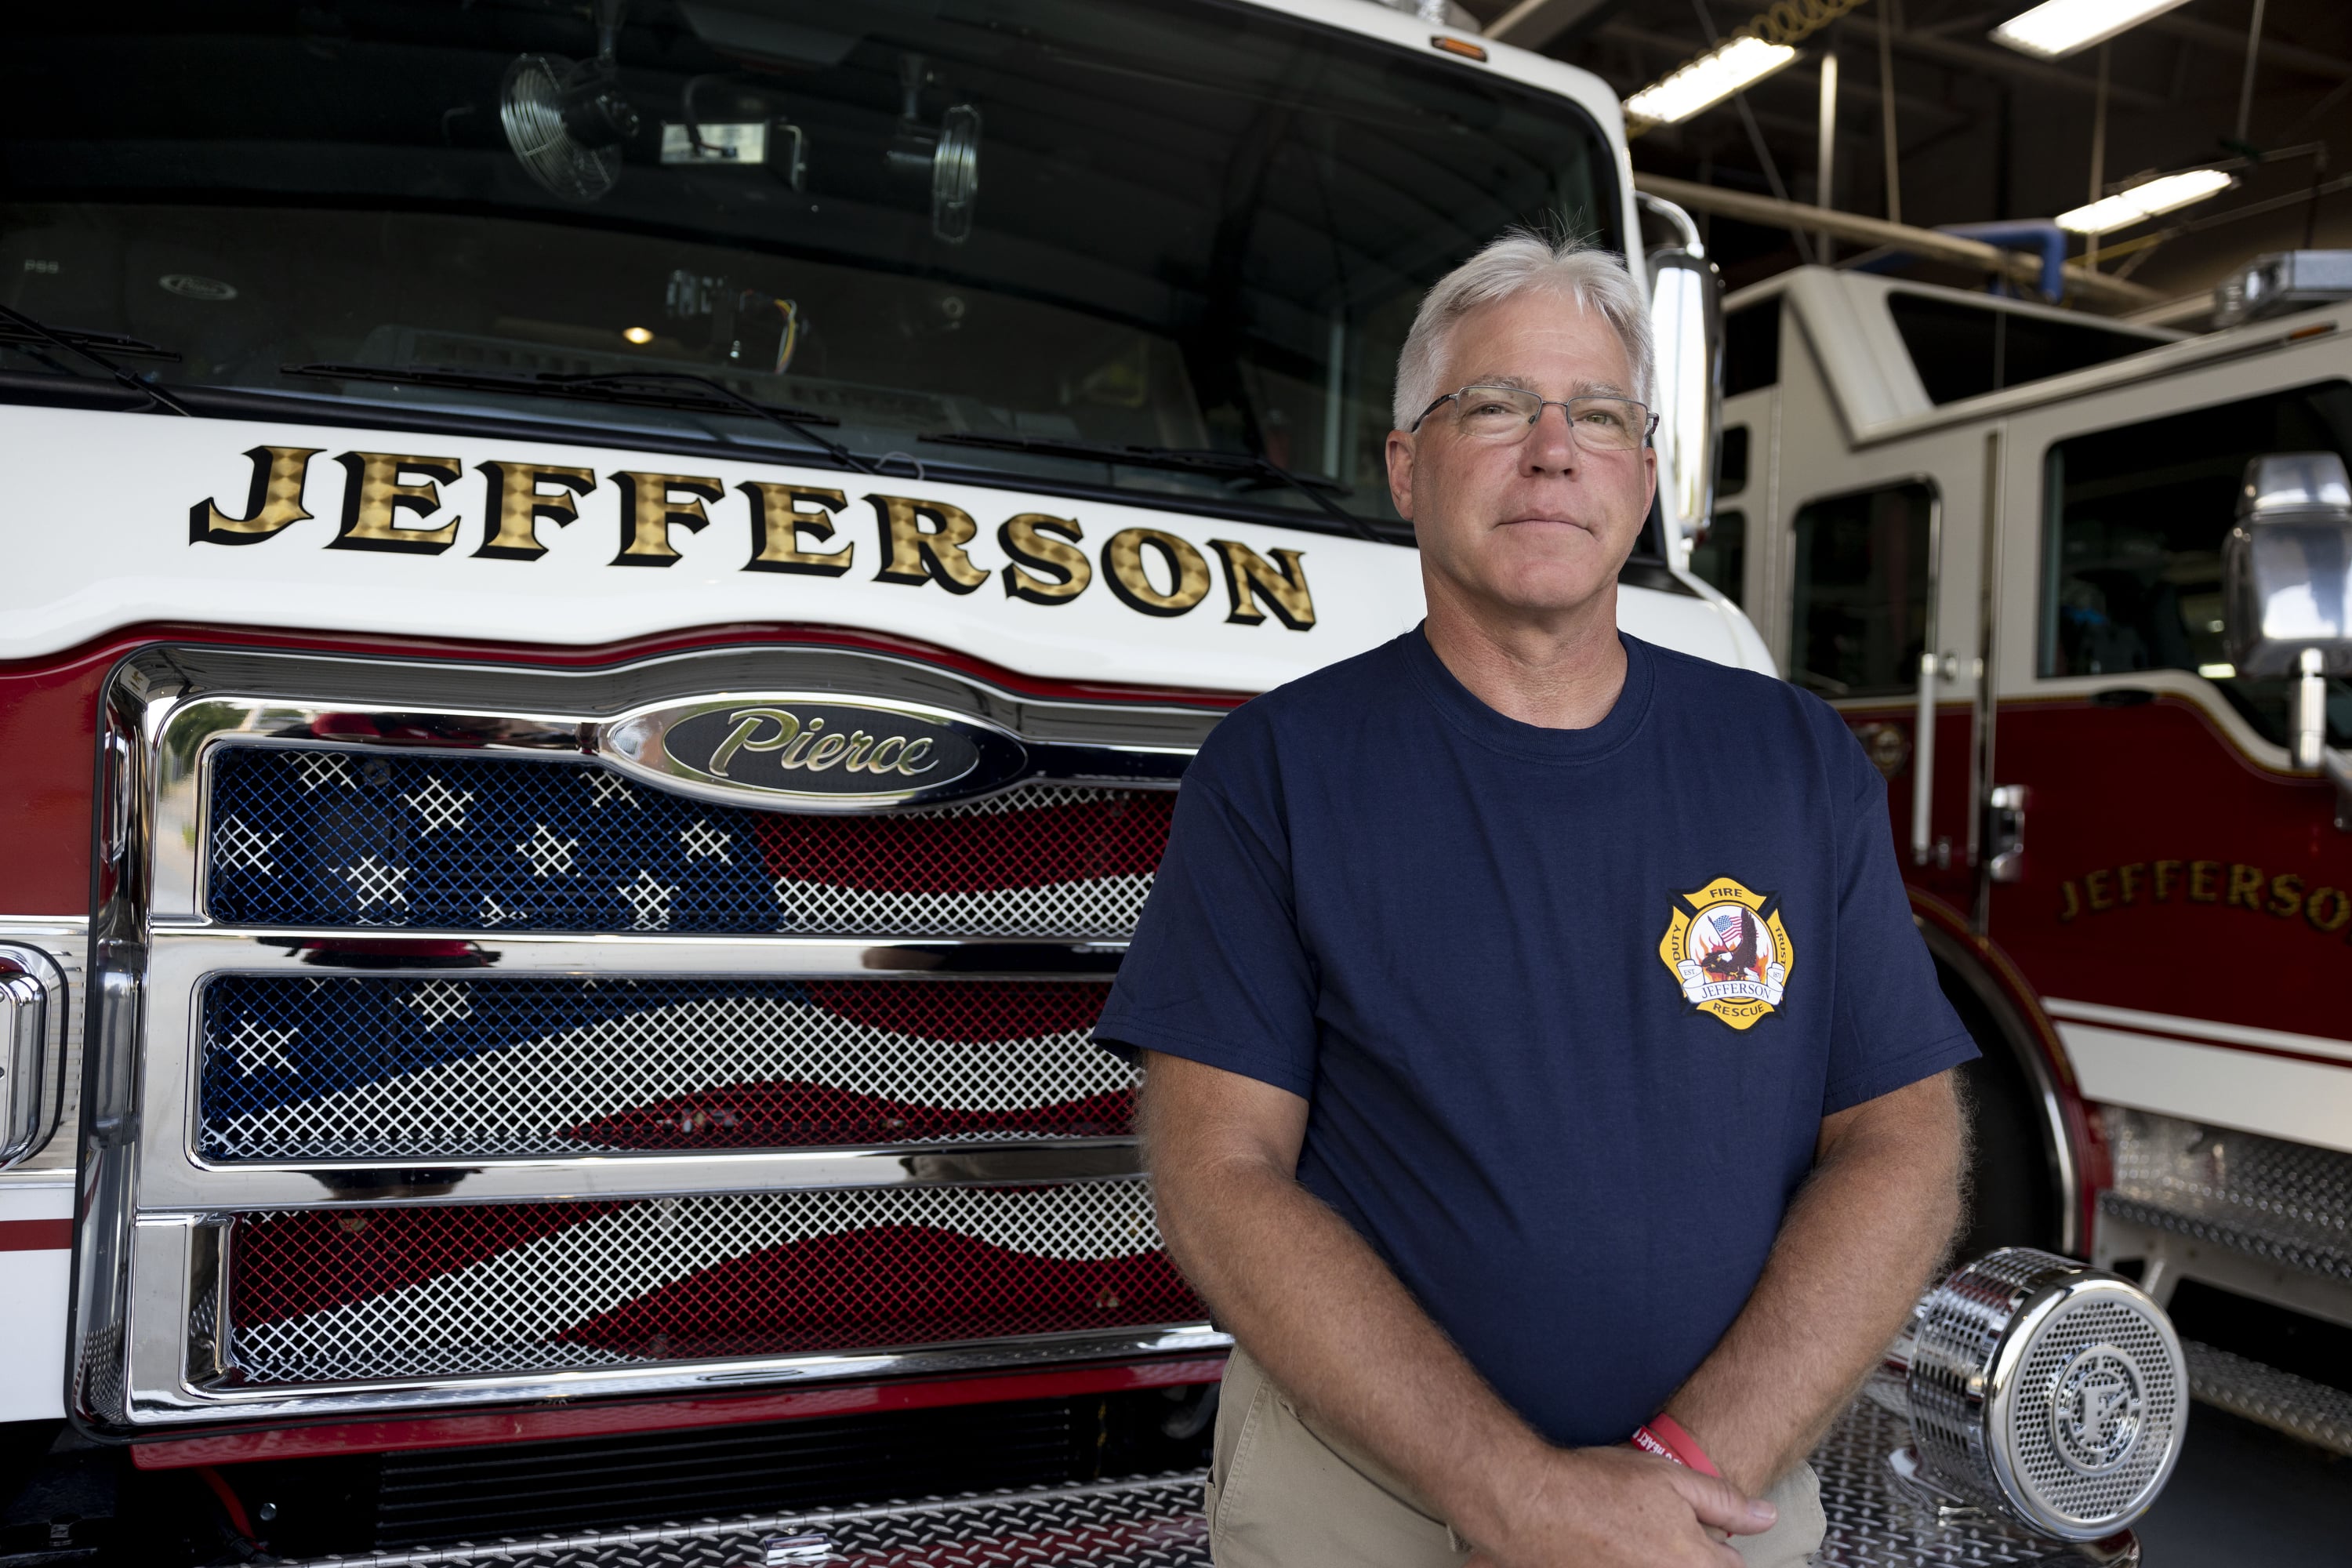 An older man in a blue shirt and glasses stands in front of a firetruck.